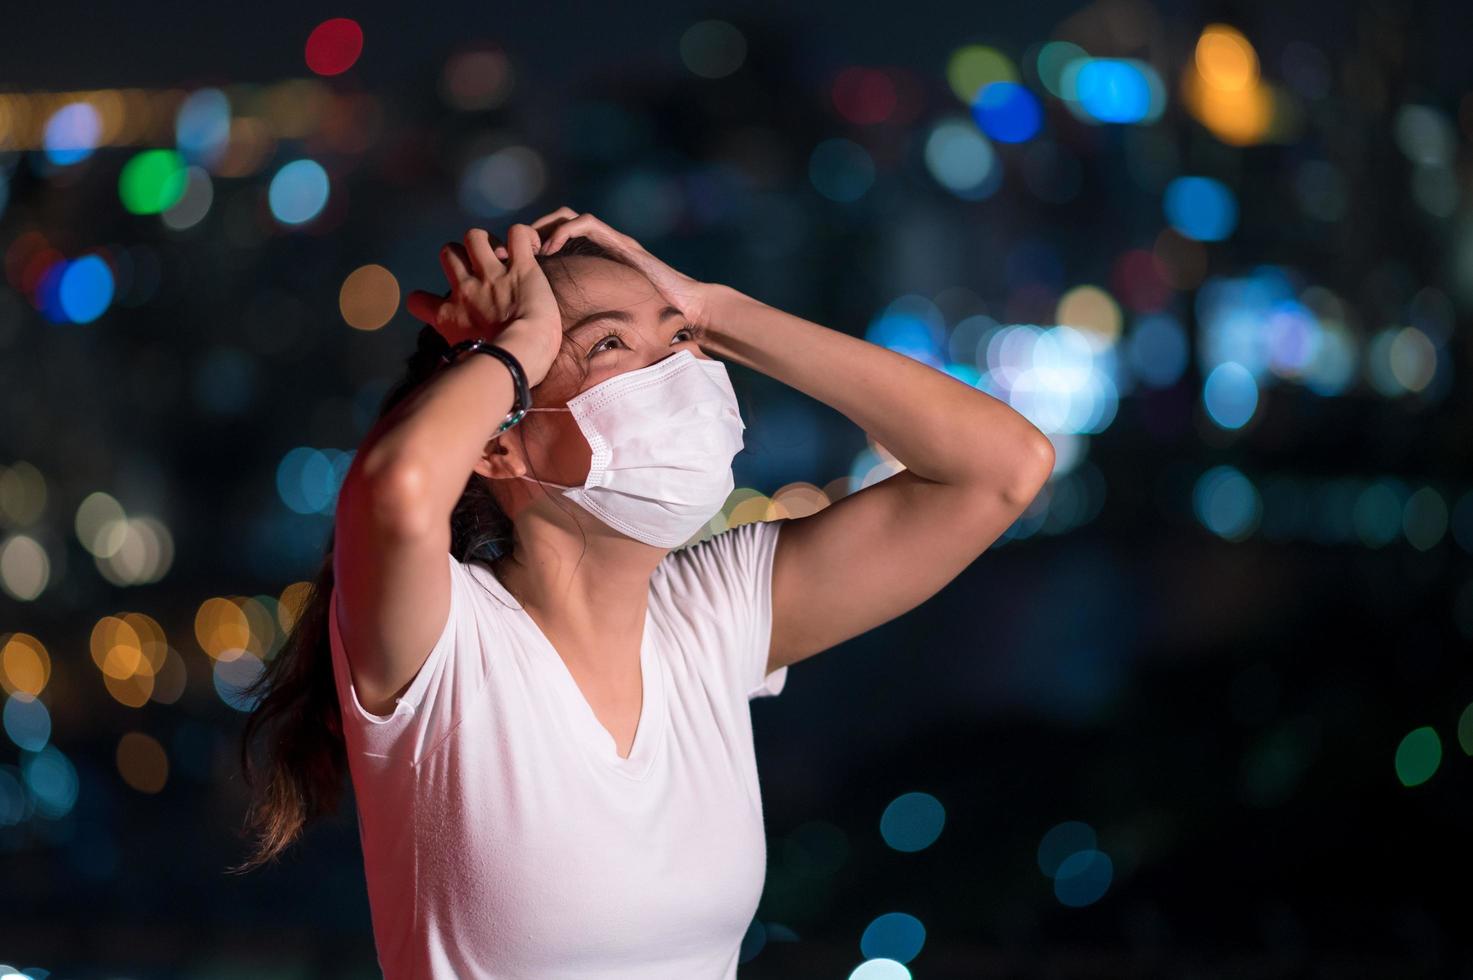 Asian women have to use a mask to cover the face to prevent pollution from dust photo